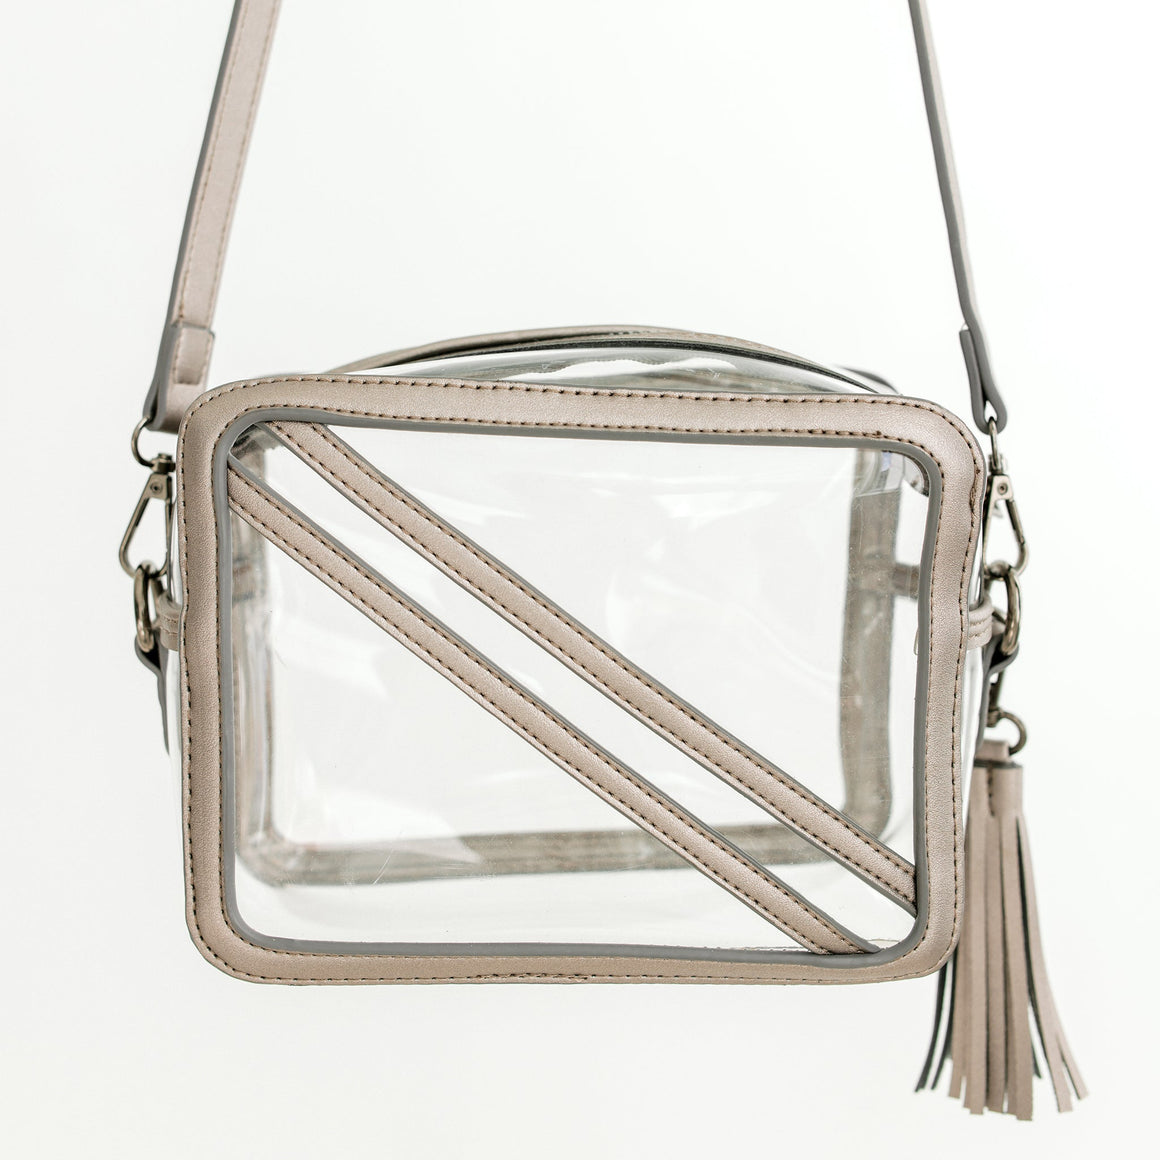 Clearly Handbags | The Cline in Gunmetal